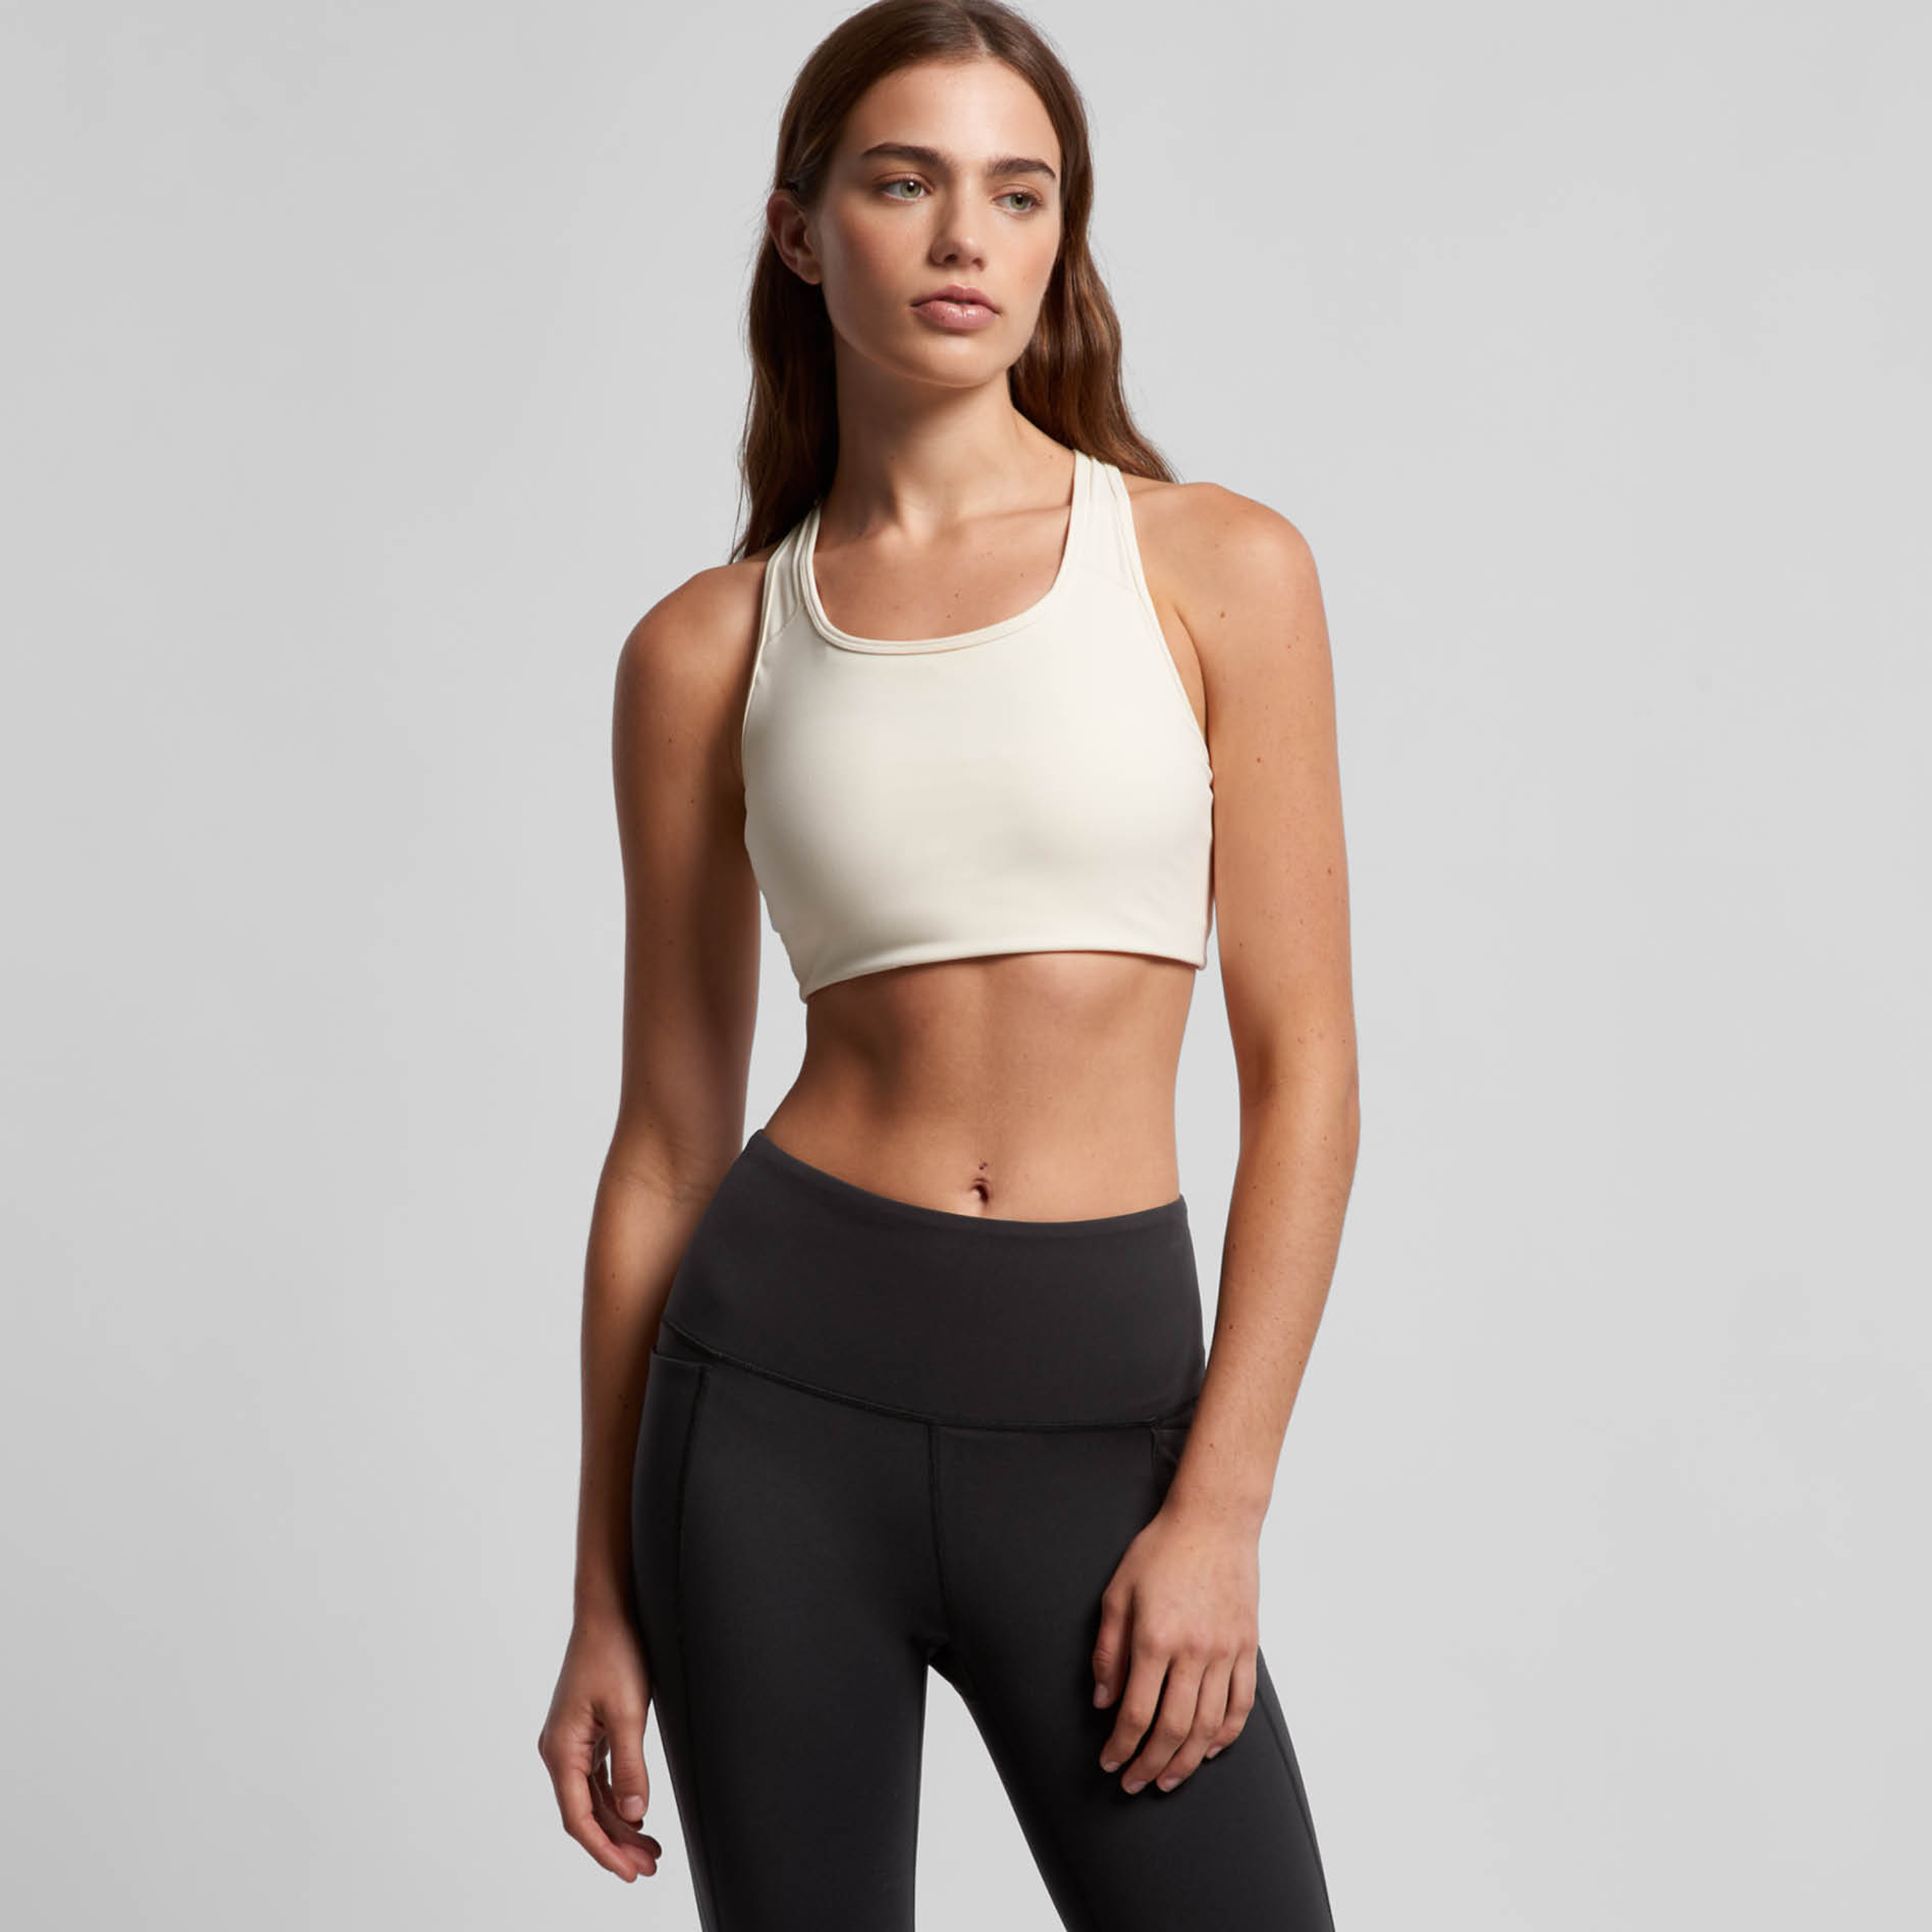 Aswati Sports Bra: Perfect Fit and Maximum Comfort, 100% Combed Cotton, 10 Colors, Quality Assurance